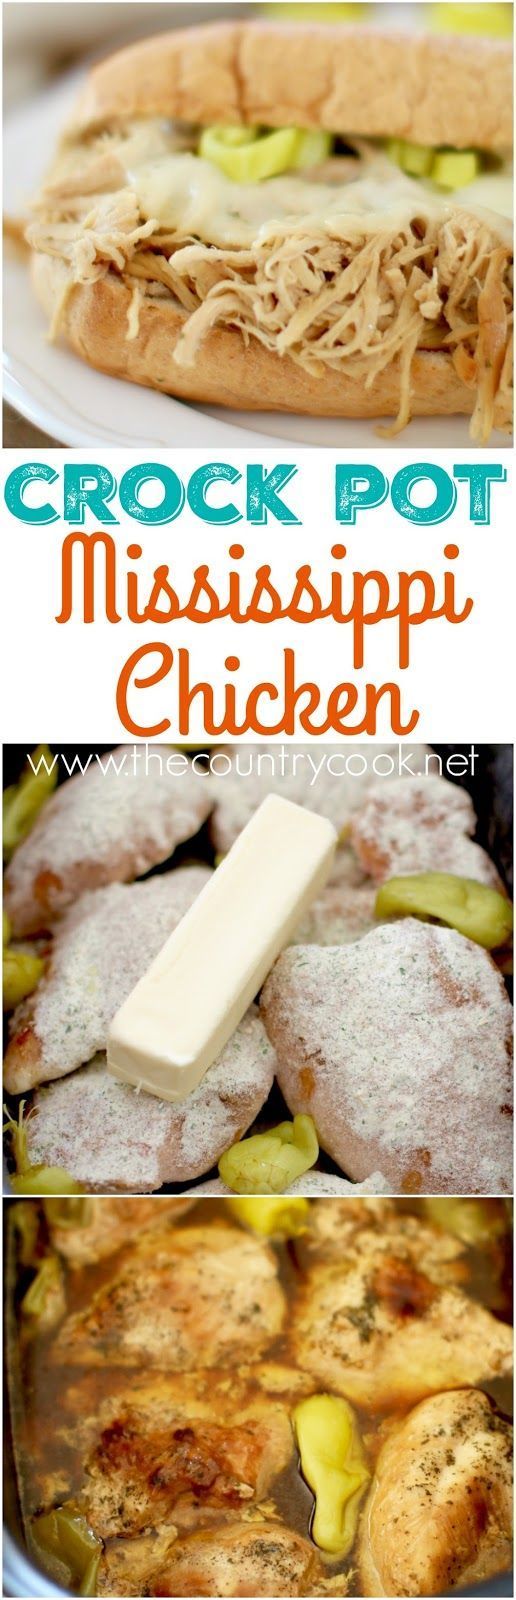 Crock Pot Mississippi Chicken recipe from The Country Cook